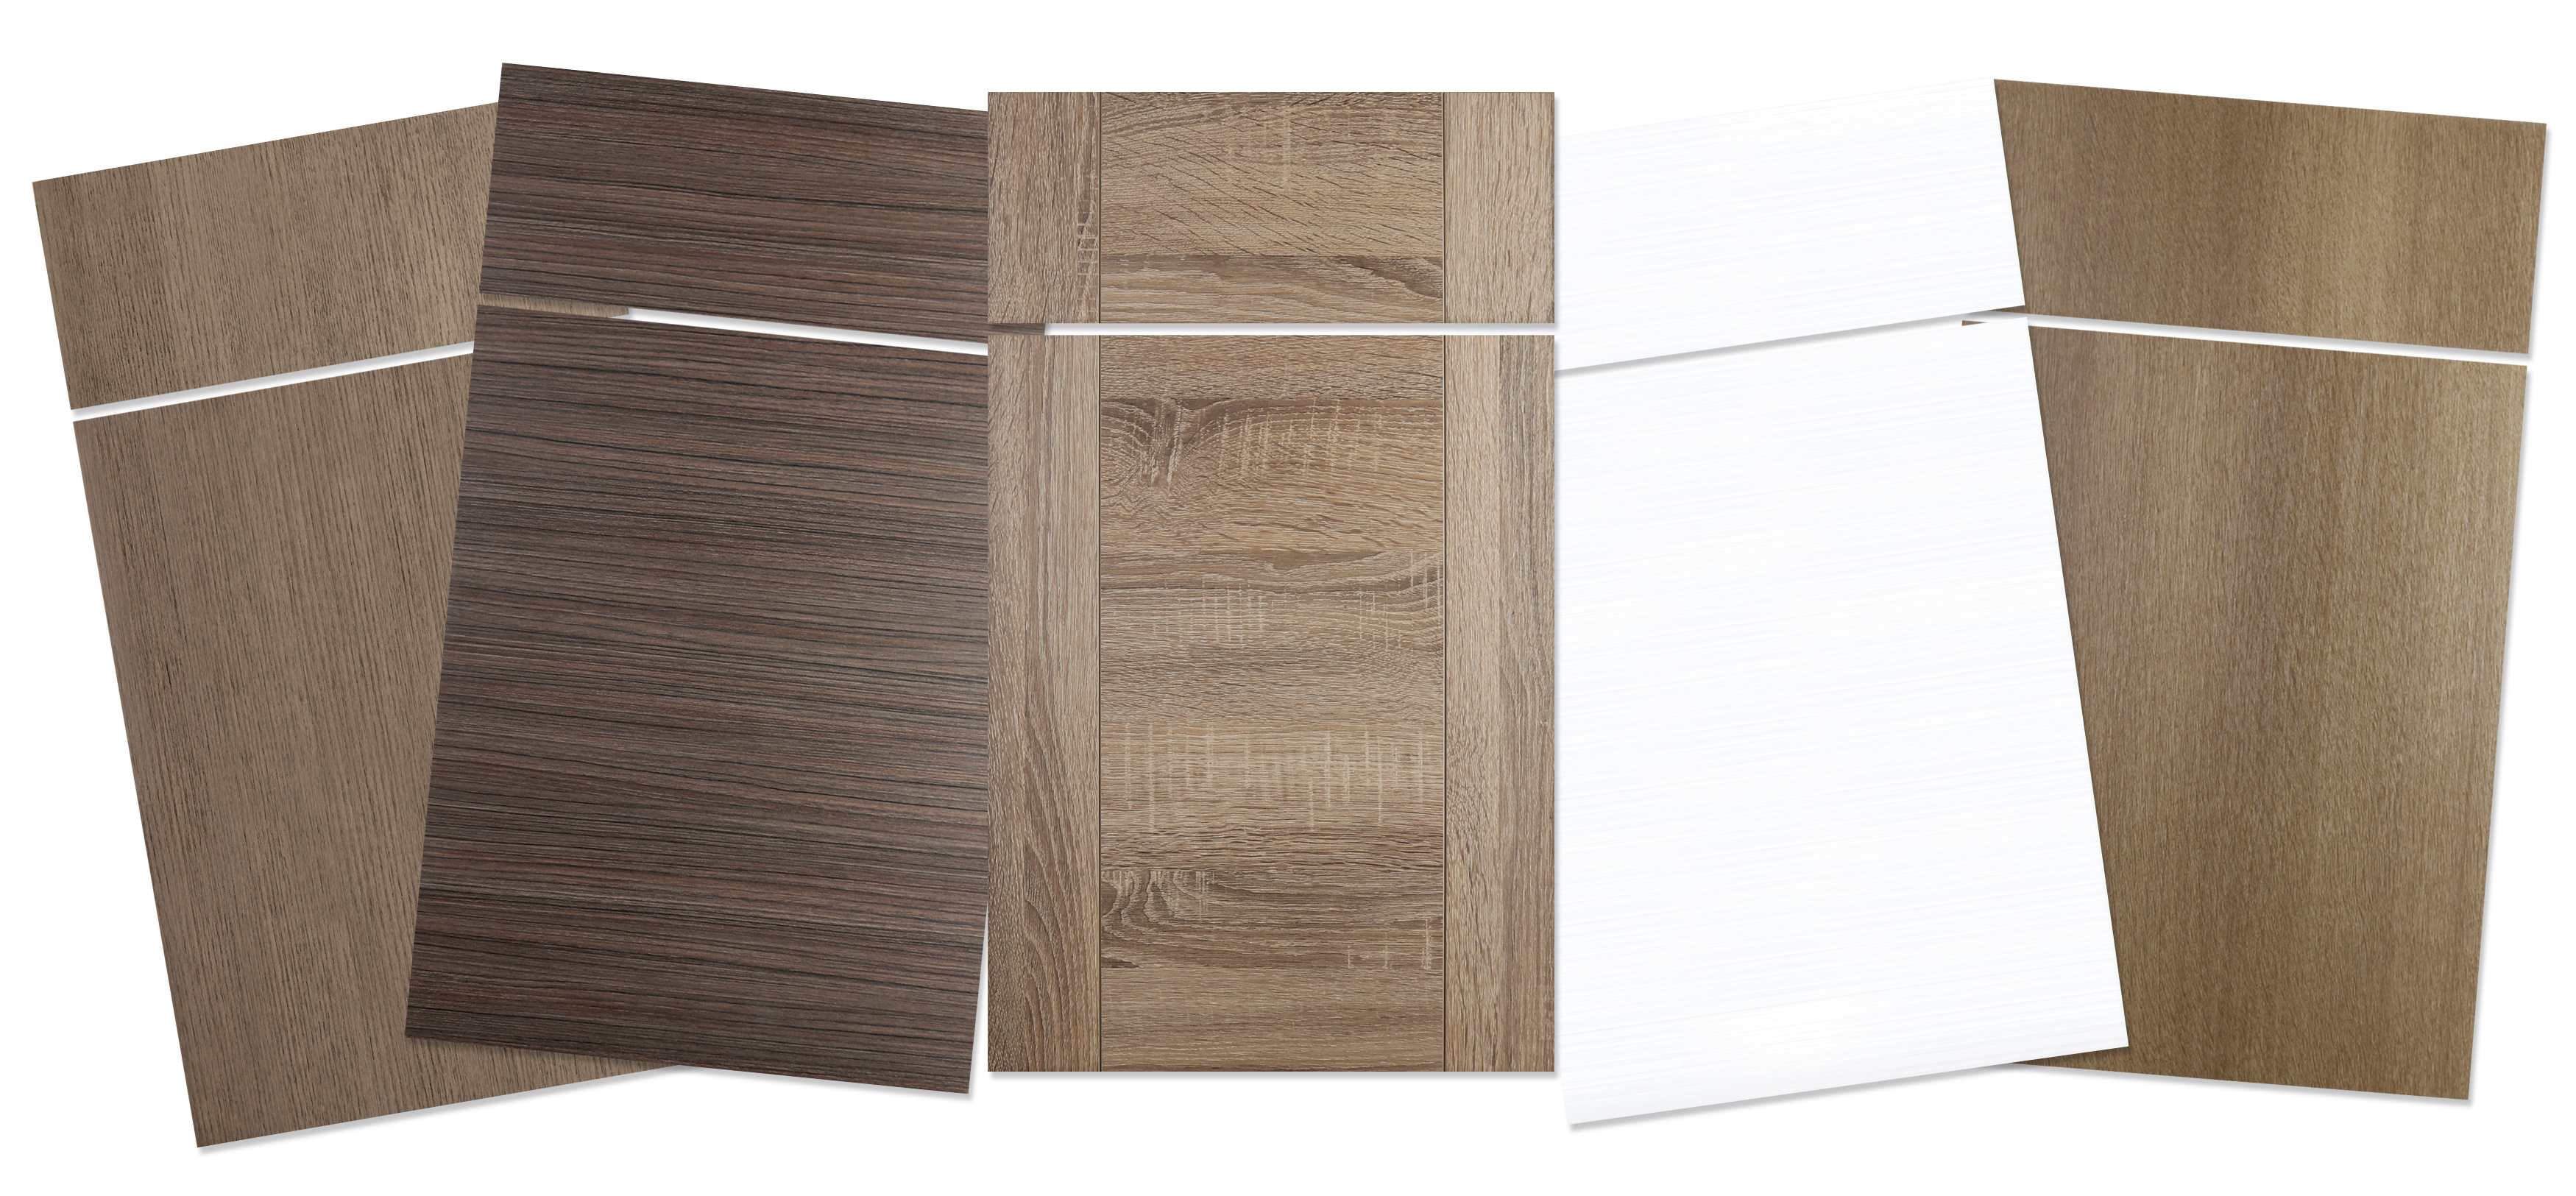 A sample of slab door styles from Dura Supreme Cabinetry.